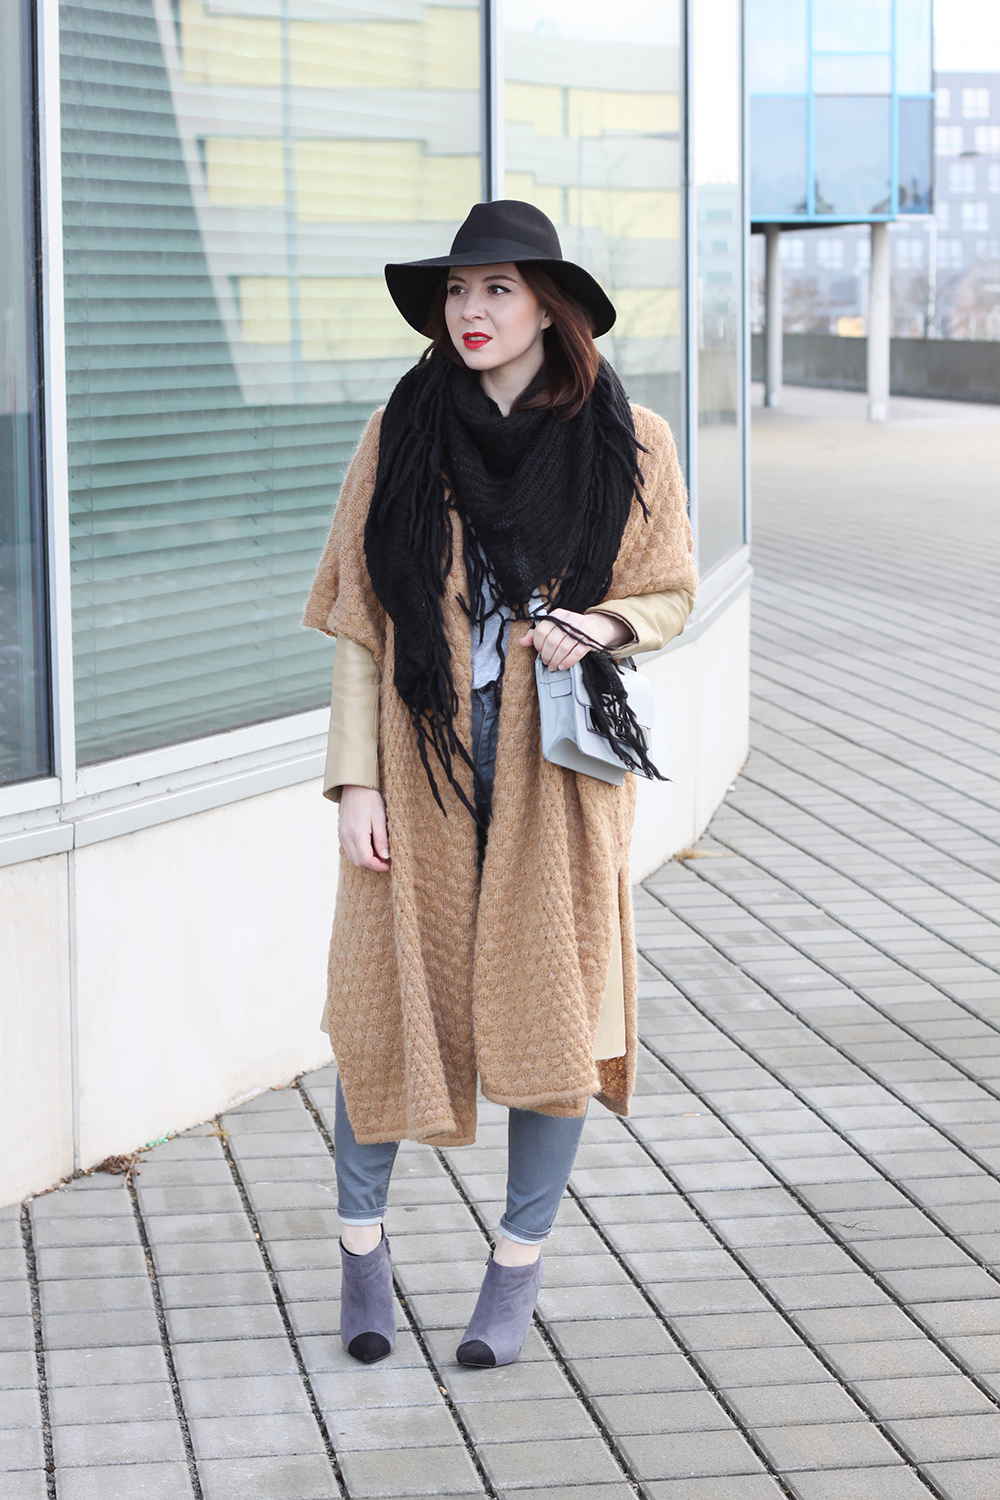 who is mocca, blogger tirol, fashionblogger, ootd, layering, lagenlook, beige, grau, neutral shades, wie kombinieren, how to style, wie traegt man, cape, poncho, anklets, fedora, rote lippen, ledermantel, vintage, topshop, cross body, fransenschal, barts, primark